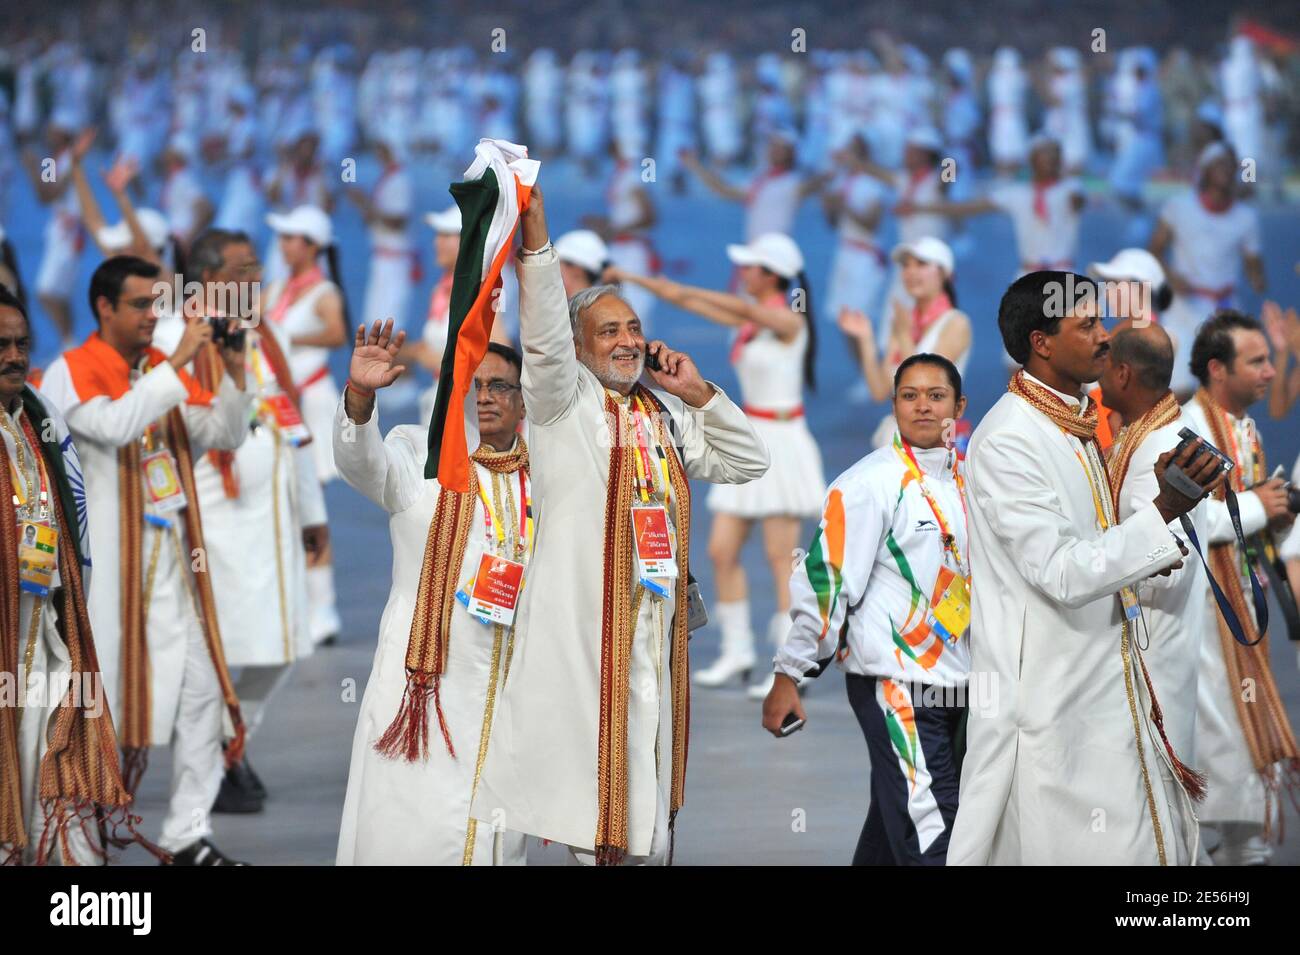 The Indian delegation during the Opening Ceremony for the 2008 Beijing Summer Olympics at the National Stadium in Beijing, China on August 8, 2008. Photo by Jean-Michel Psaila/ABACAPRESS.COM Stock Photo